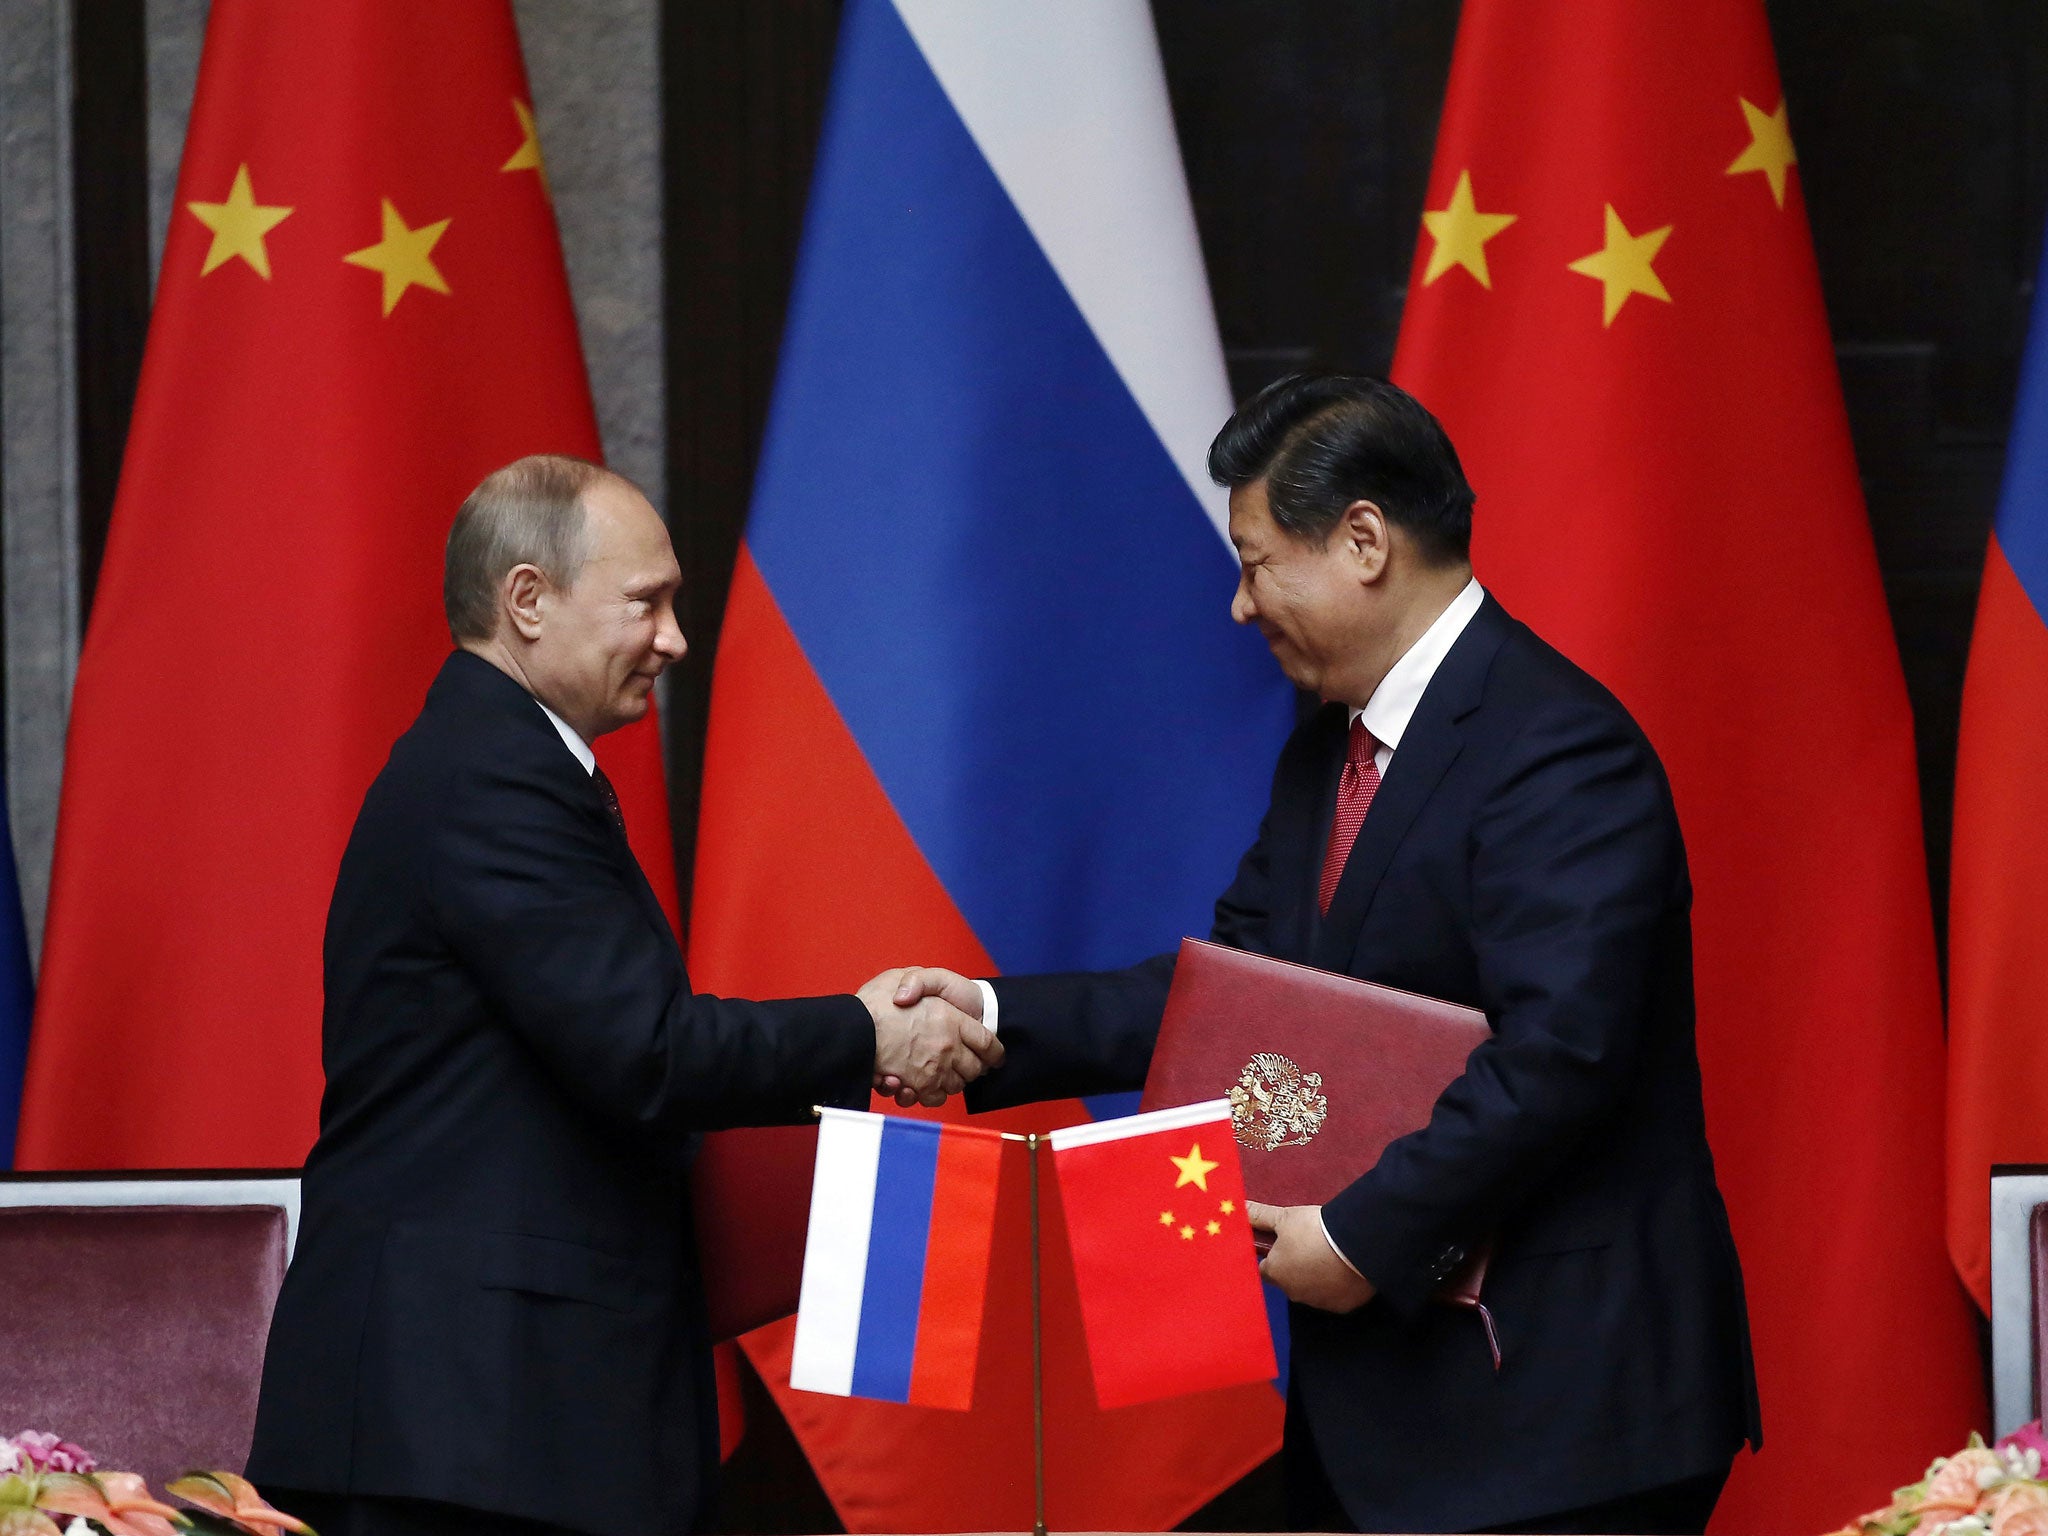 Russia's President Vladimir Putin, left, and China's President Xi Jinping shake hands during a bilateral meeting in Shanghai